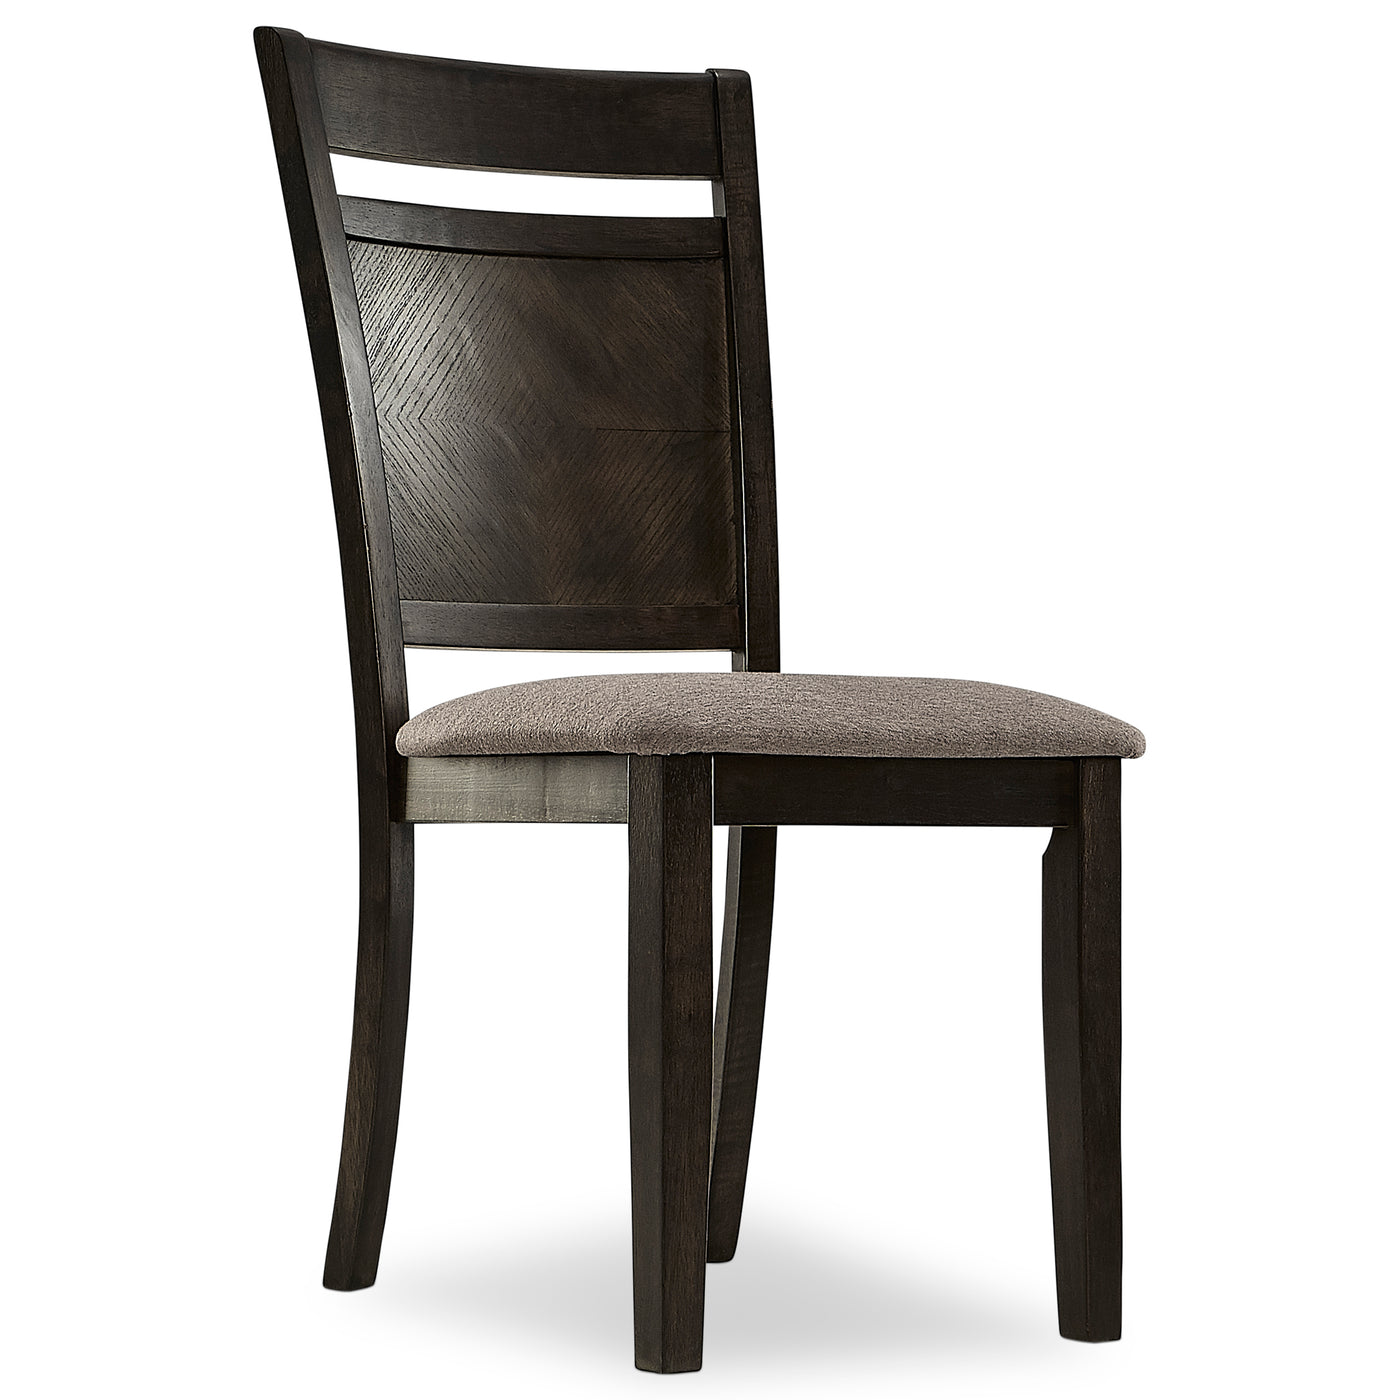 Colin Dining Chair - Dark Brown